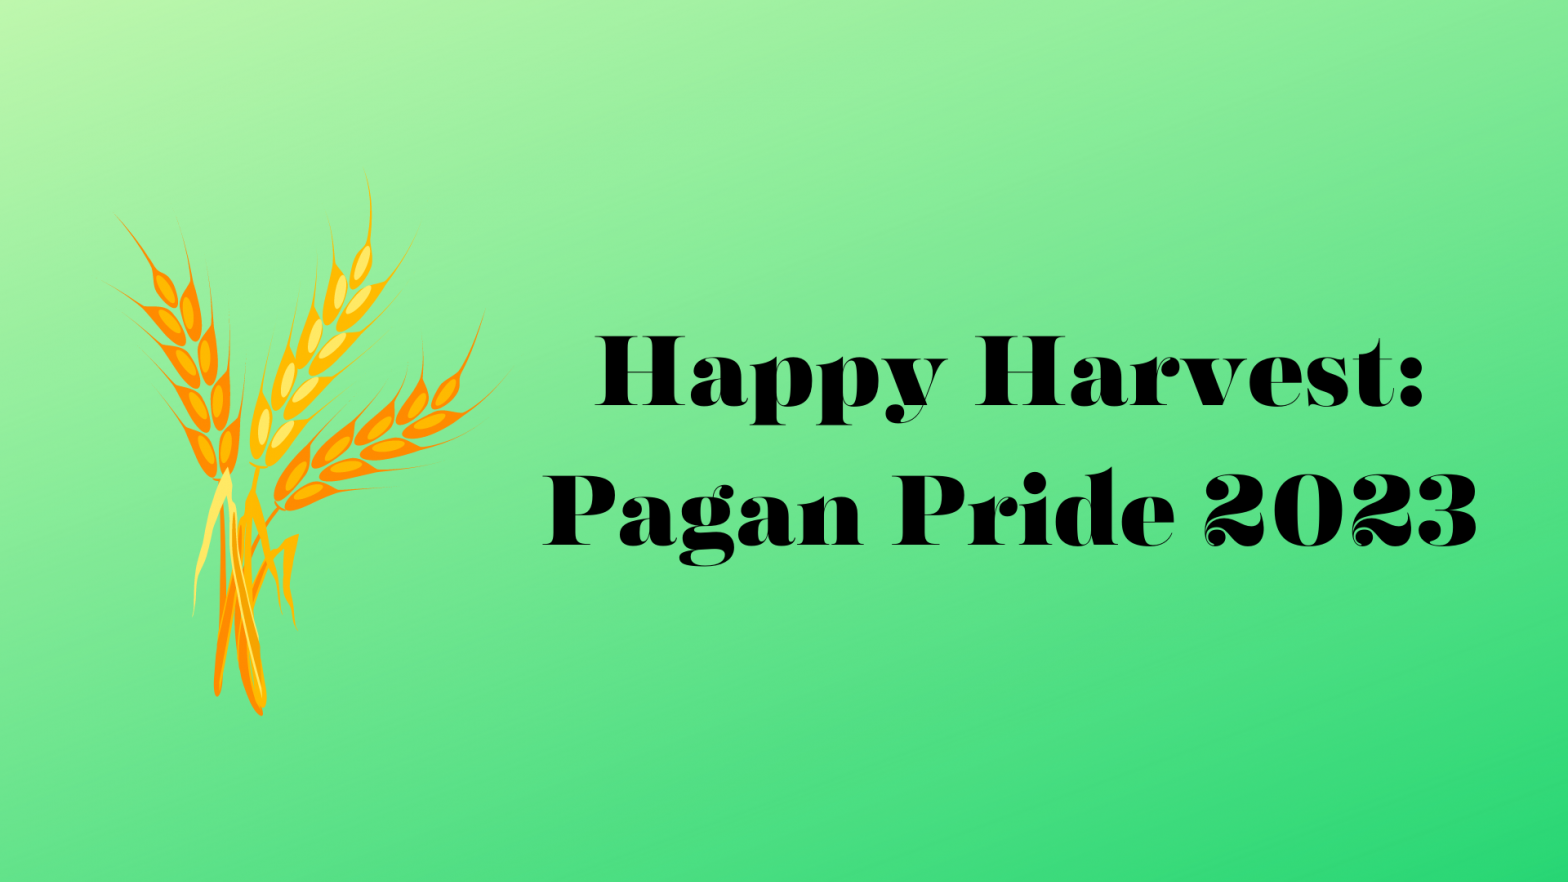 Green background, gold wheat sheaf on the left, black text that says "Happy Harvest: Pagan Pride 2023"